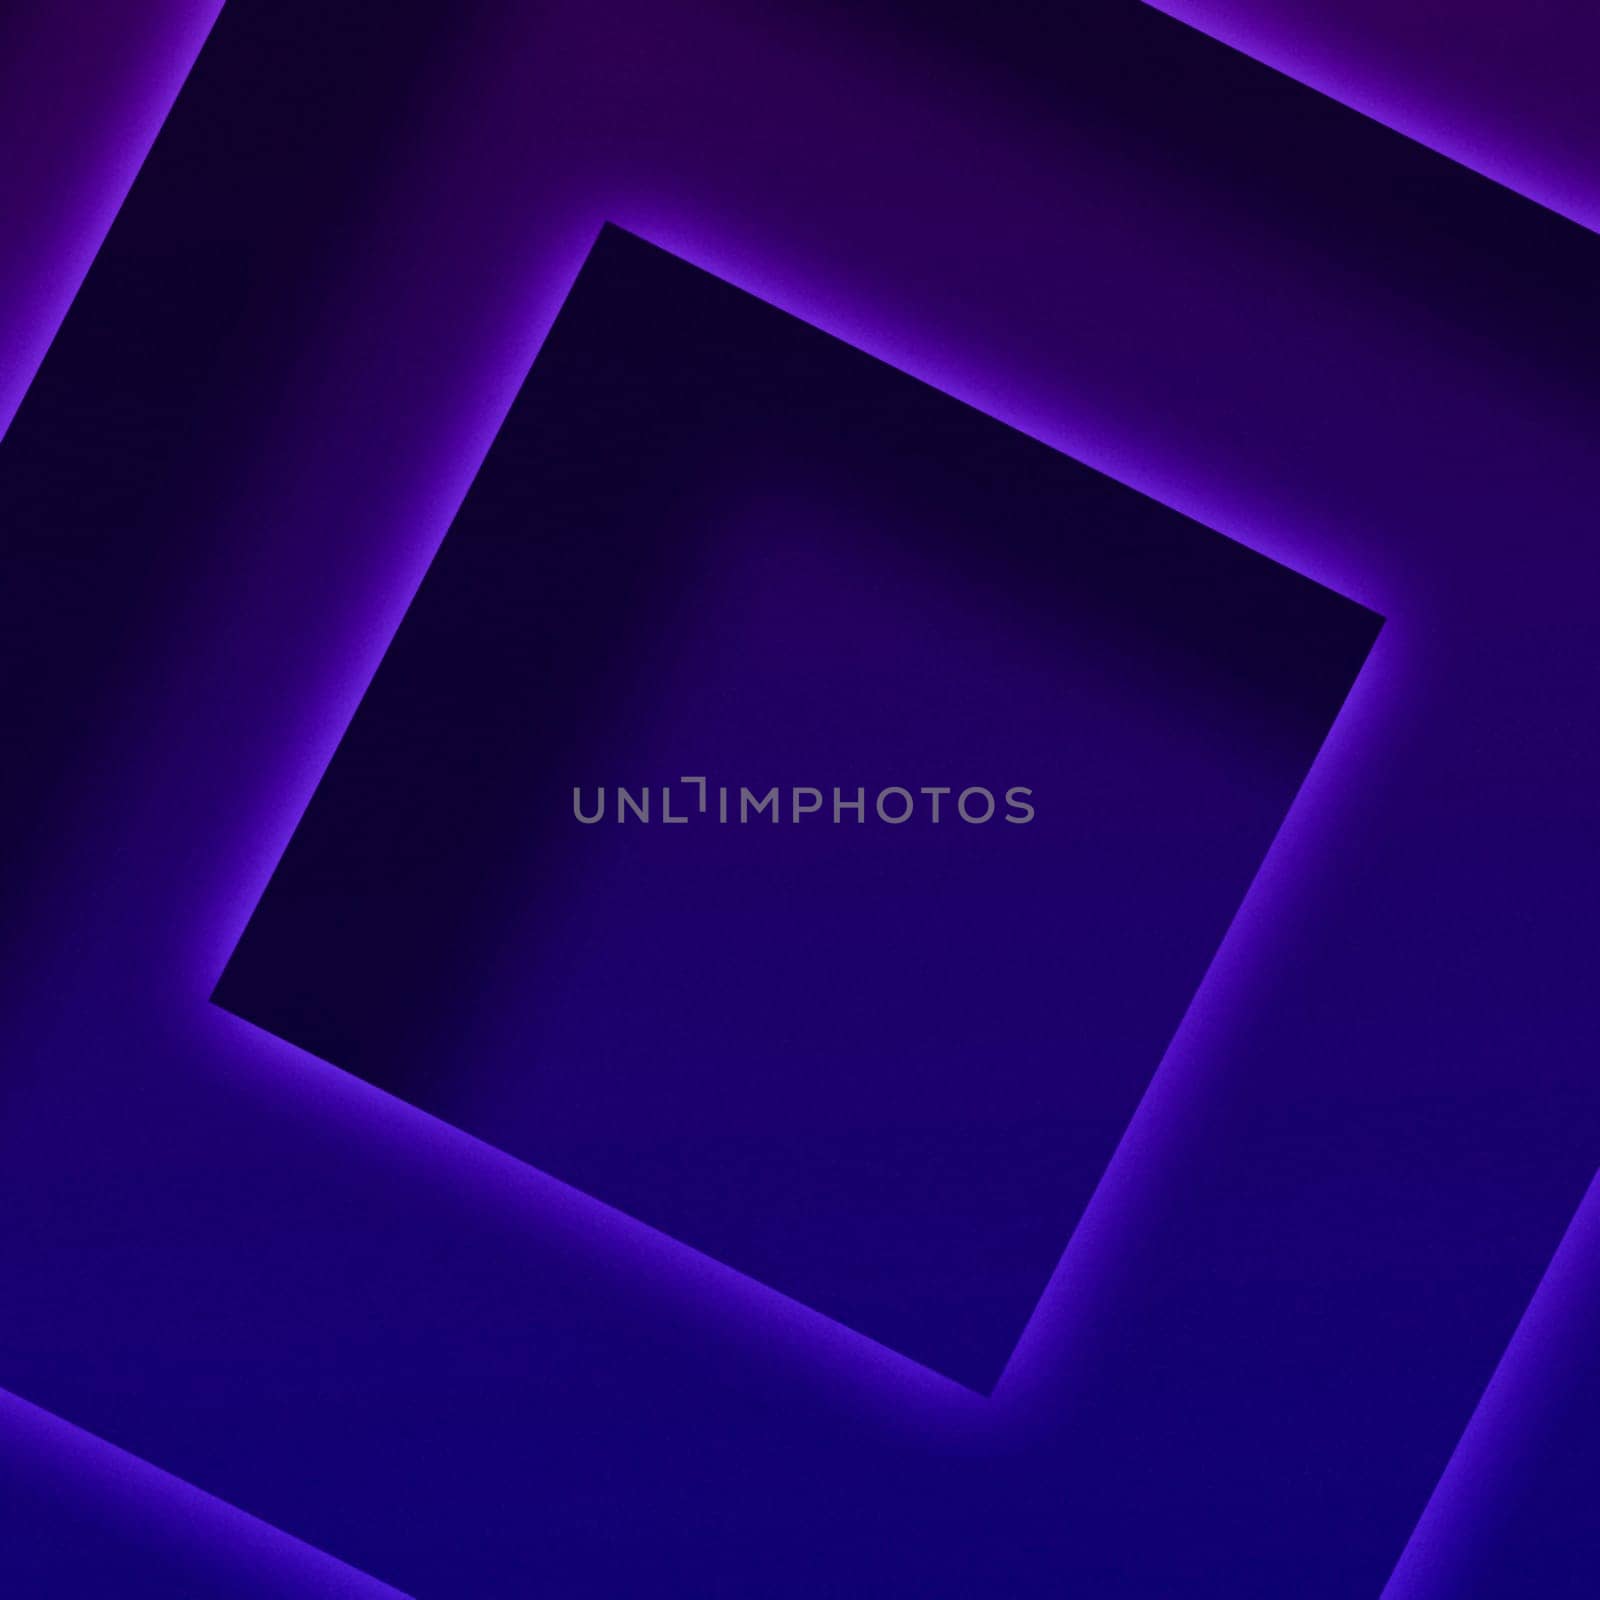 Abstract light event background with neon squares.